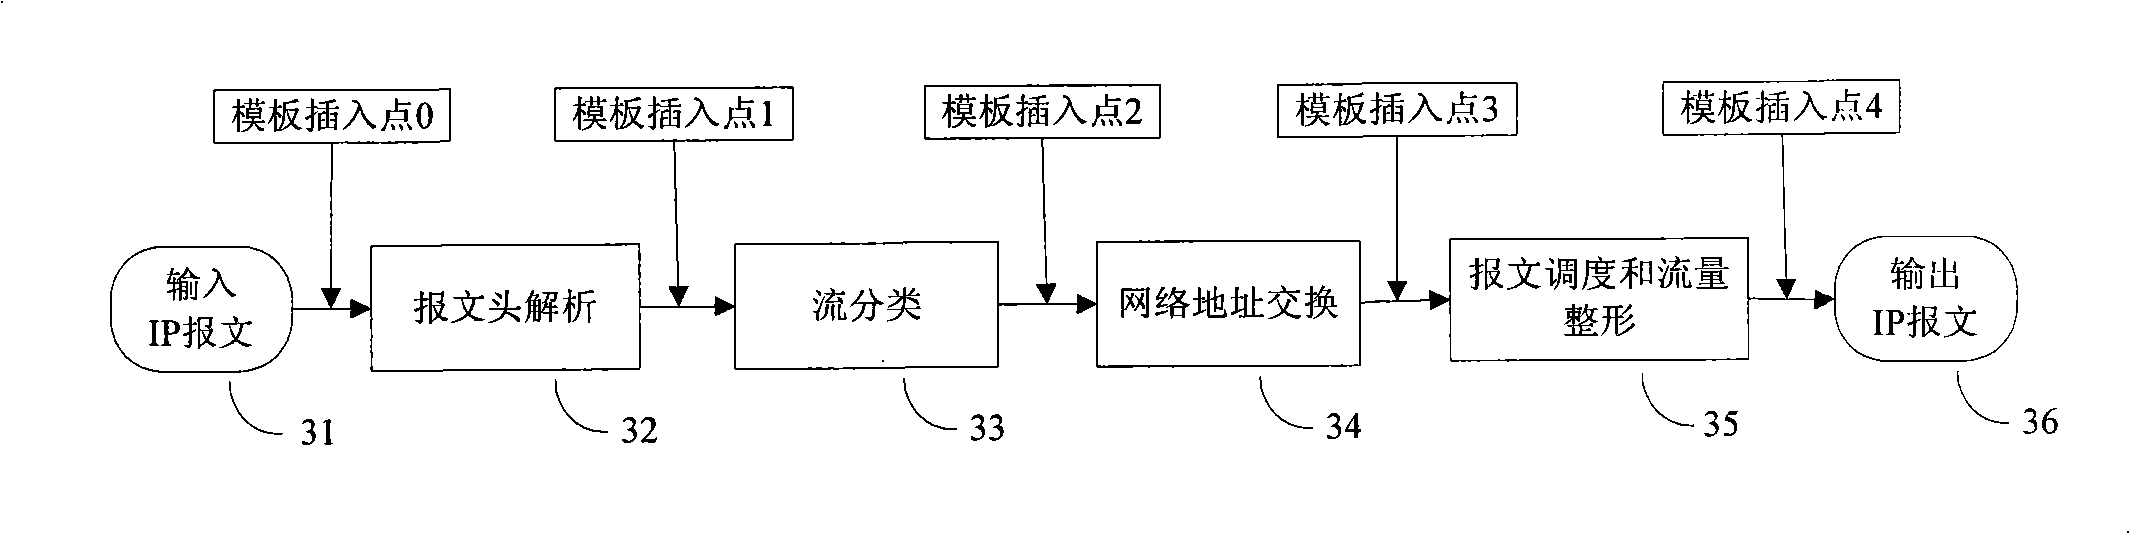 Method and equipment for tracing packet